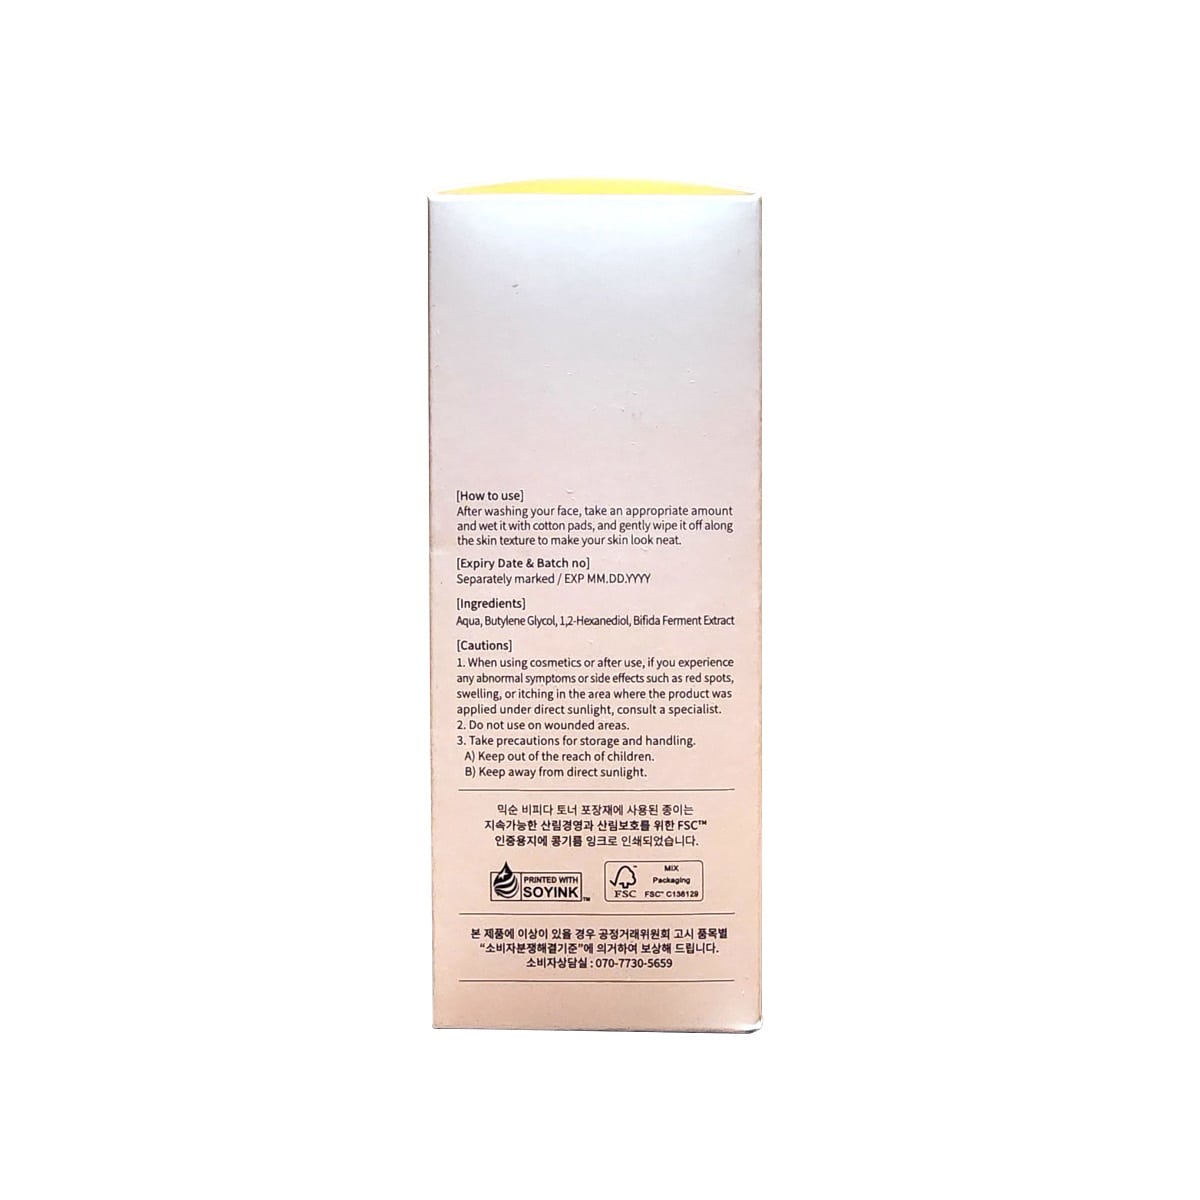 How to use, ingredients, cautions for mixsoon Bifida Toner (300 mL) in English